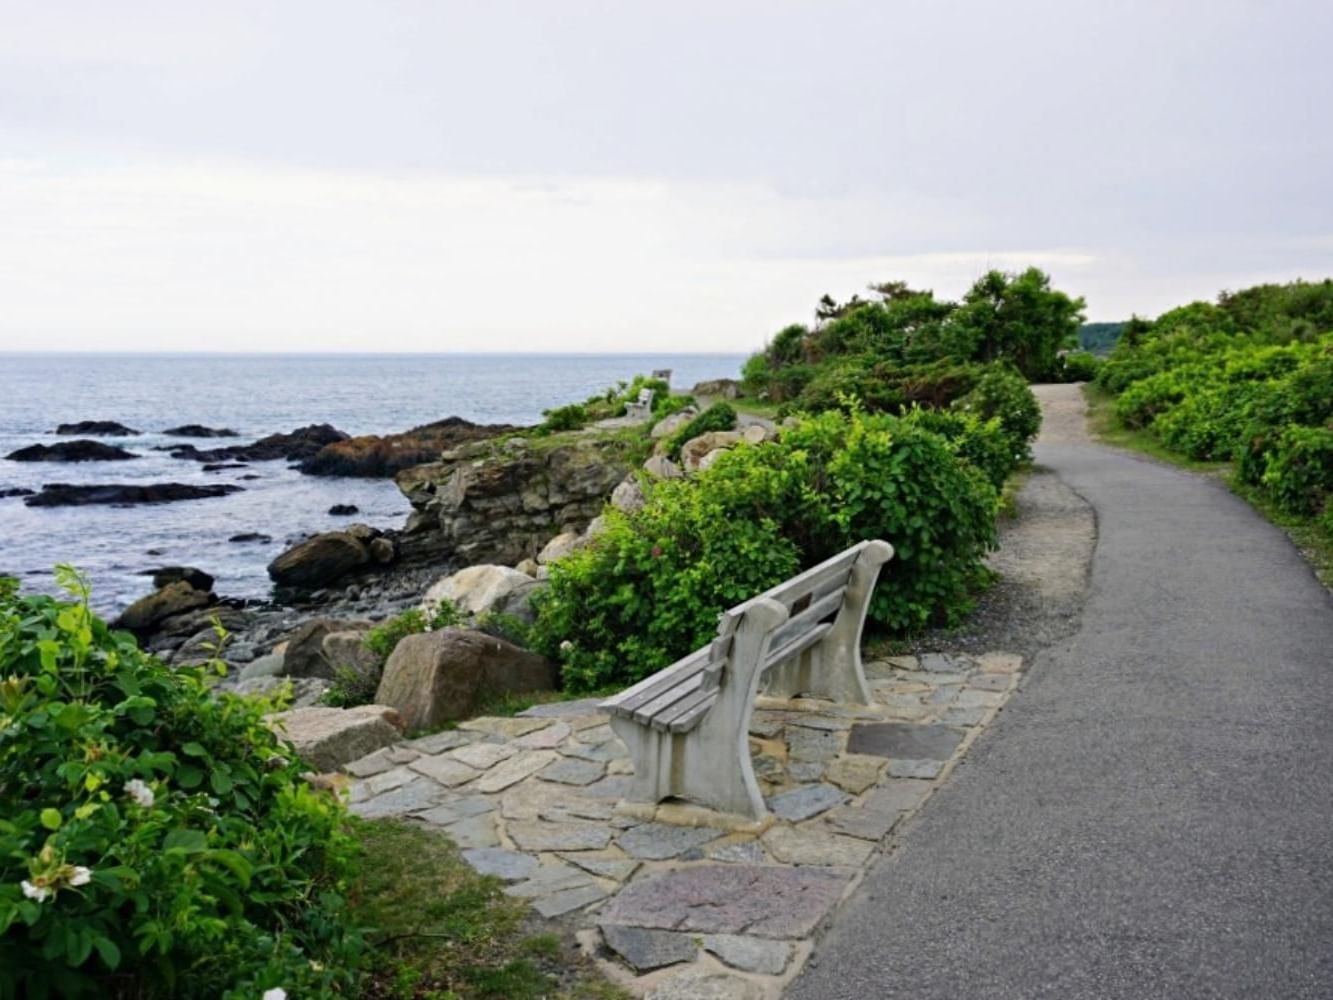 A bench on a coastal path overlooking the ocean in Marginal Way near Anchorage by the Sea